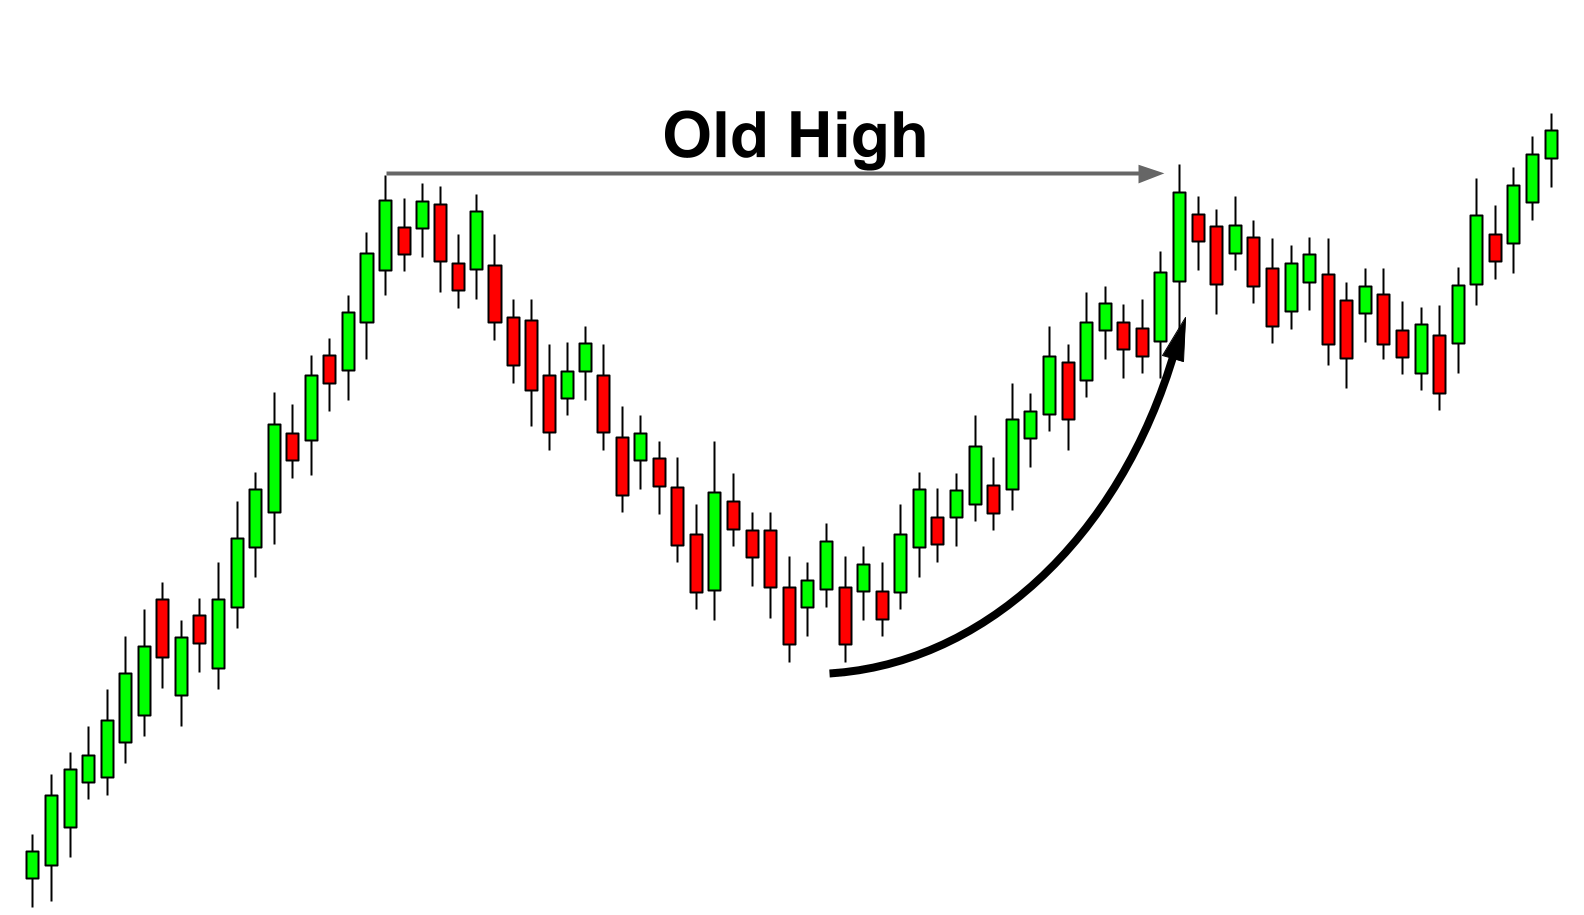 Buyers nervousness to sell, thus, create a curved handle pattern